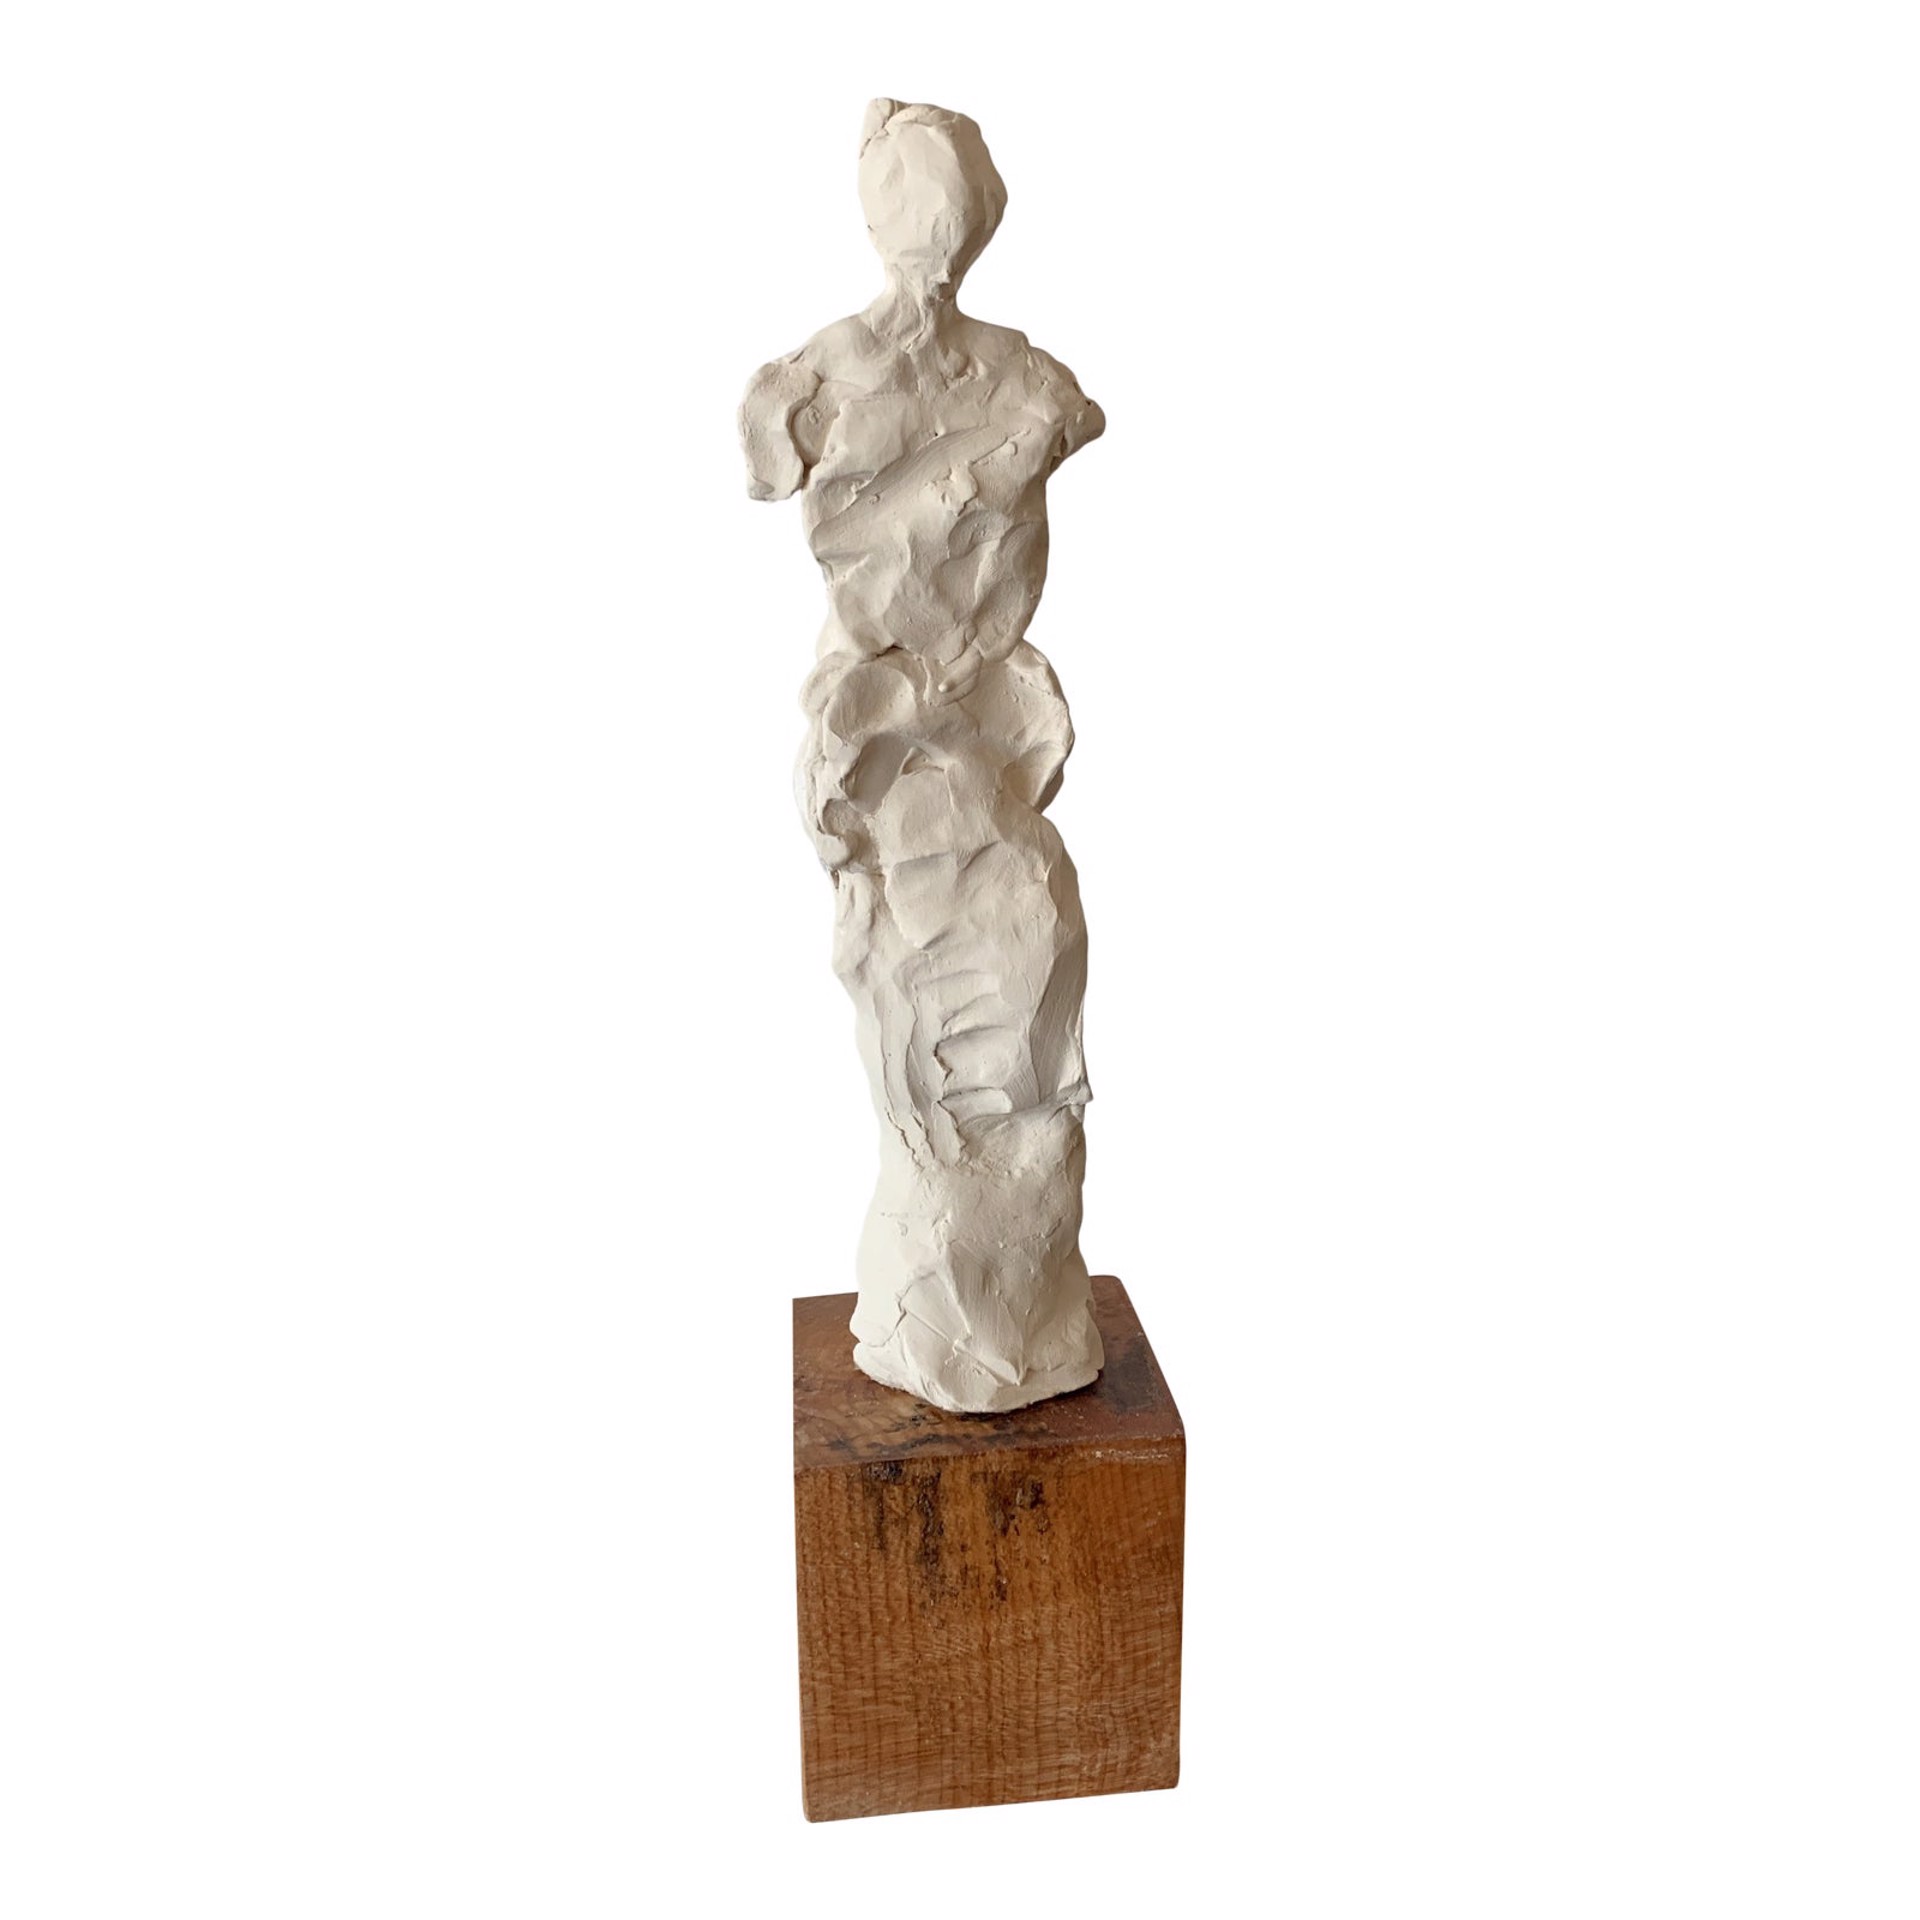 SOLD Figurative Sculpture by Stephanie Wheeler